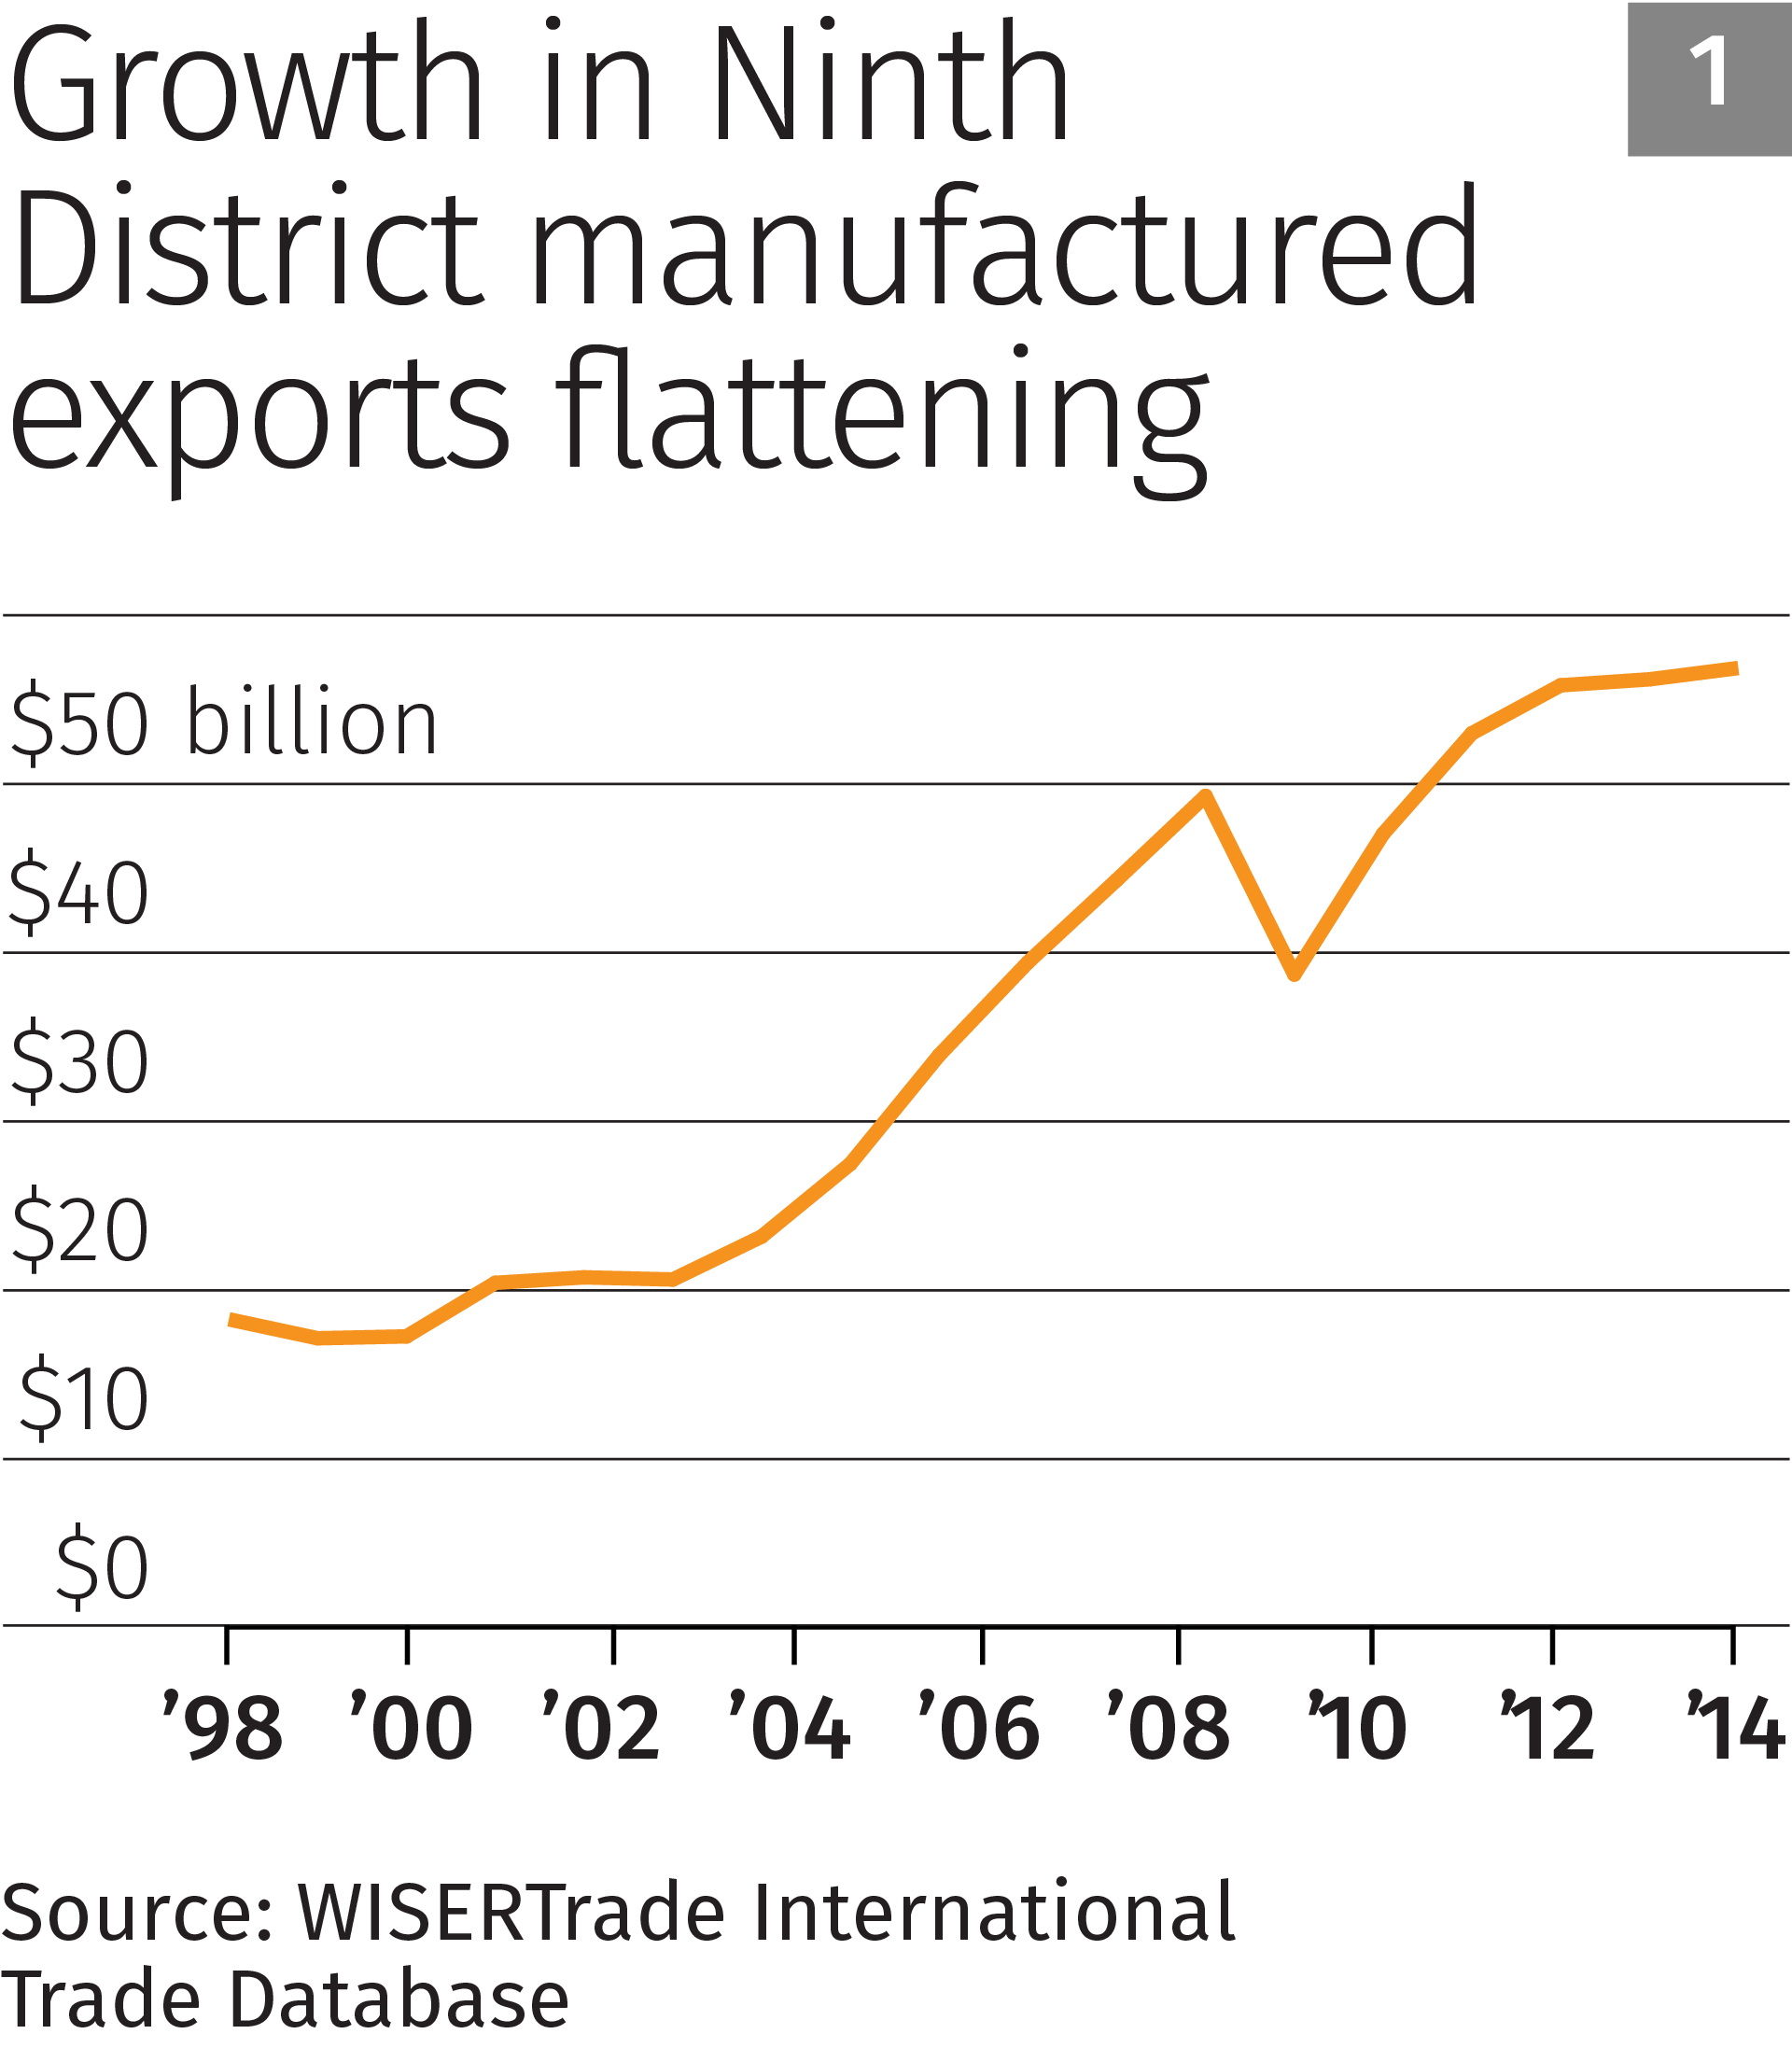 Chart 1: Growth in Ninth District manufactured exports flattening